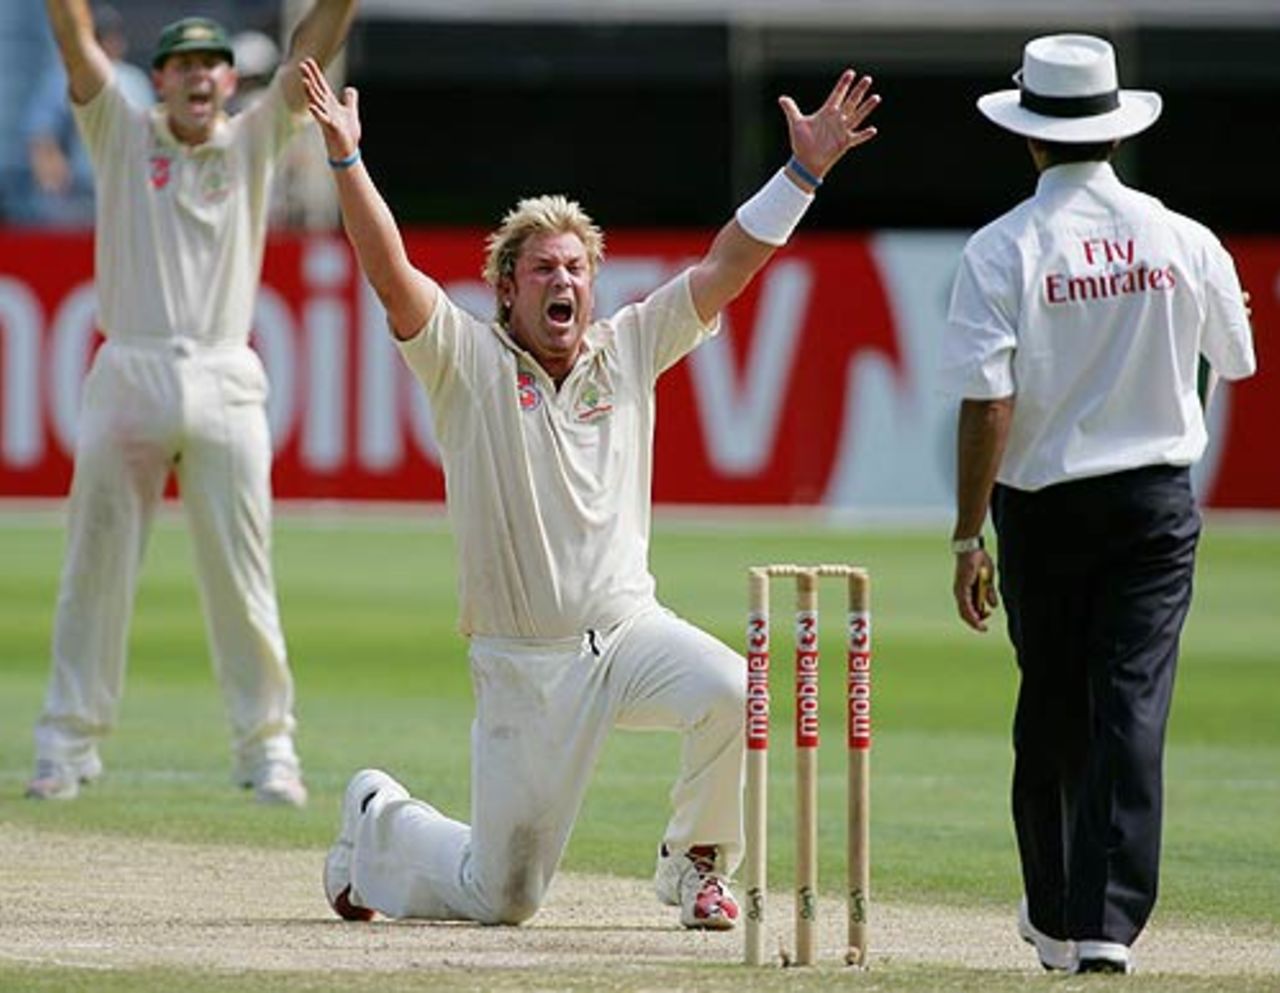 Shane Warne appeals for a wicket during the fourth day, Australia v South Africa, 2nd Test, Melbourne, 4th day, December 29, 2005